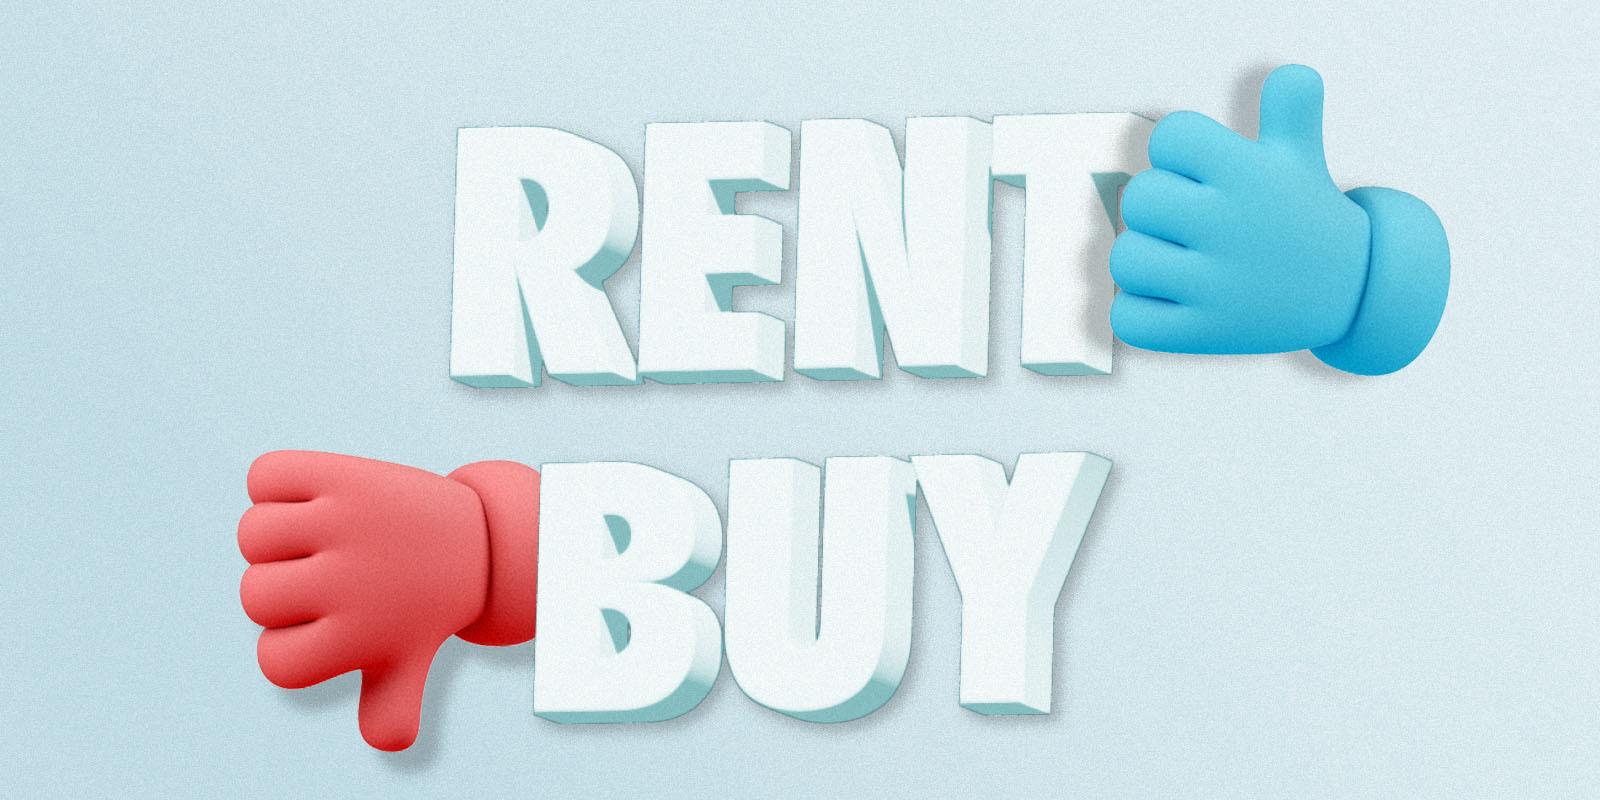 It’s Now Cheaper To Rent Than Buy In The UK